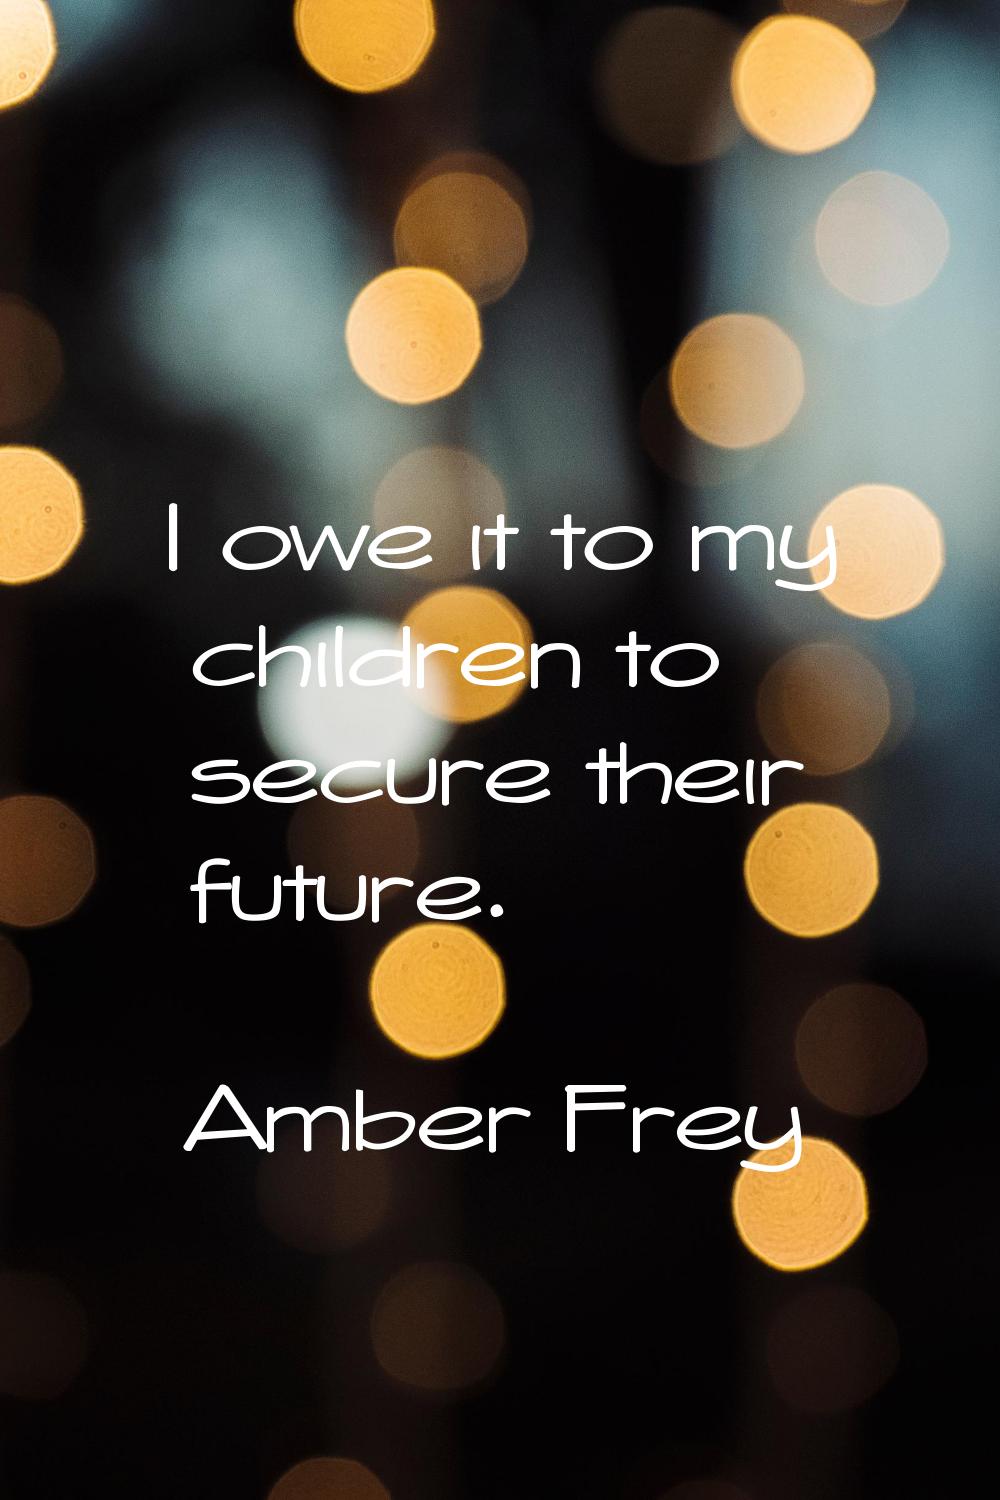 I owe it to my children to secure their future.